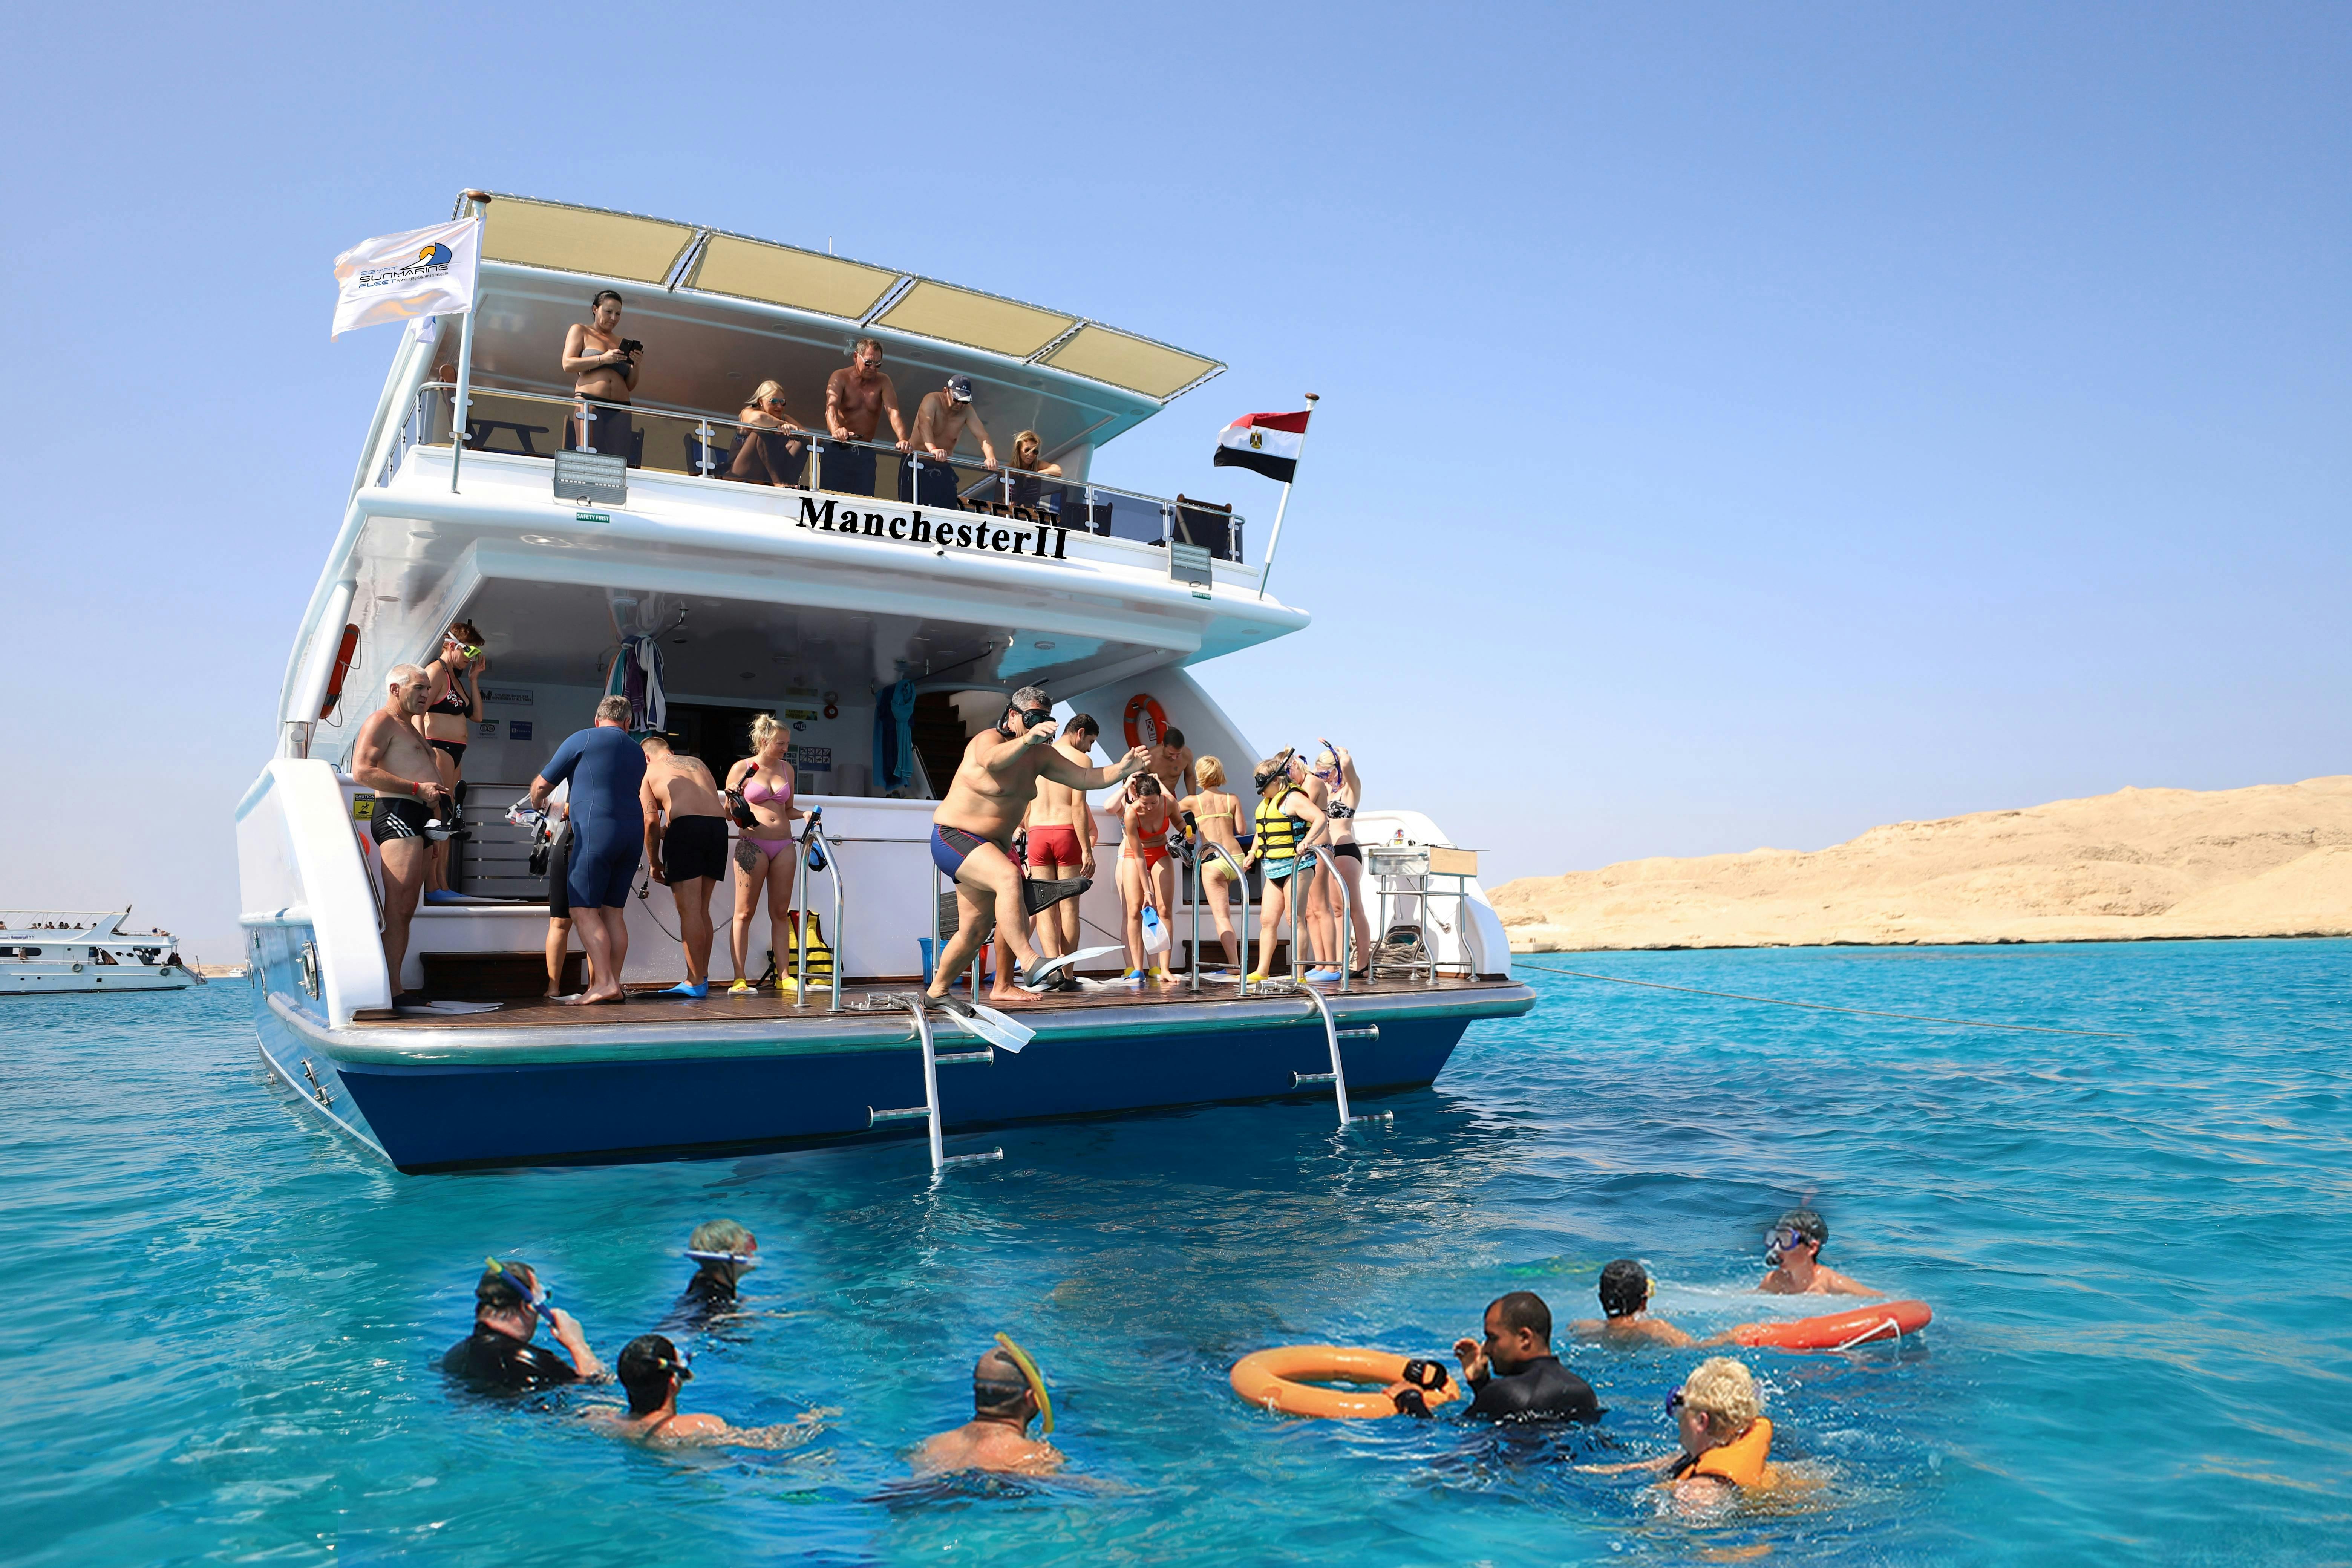 Classic family Red sea cruise experience from Hurghada